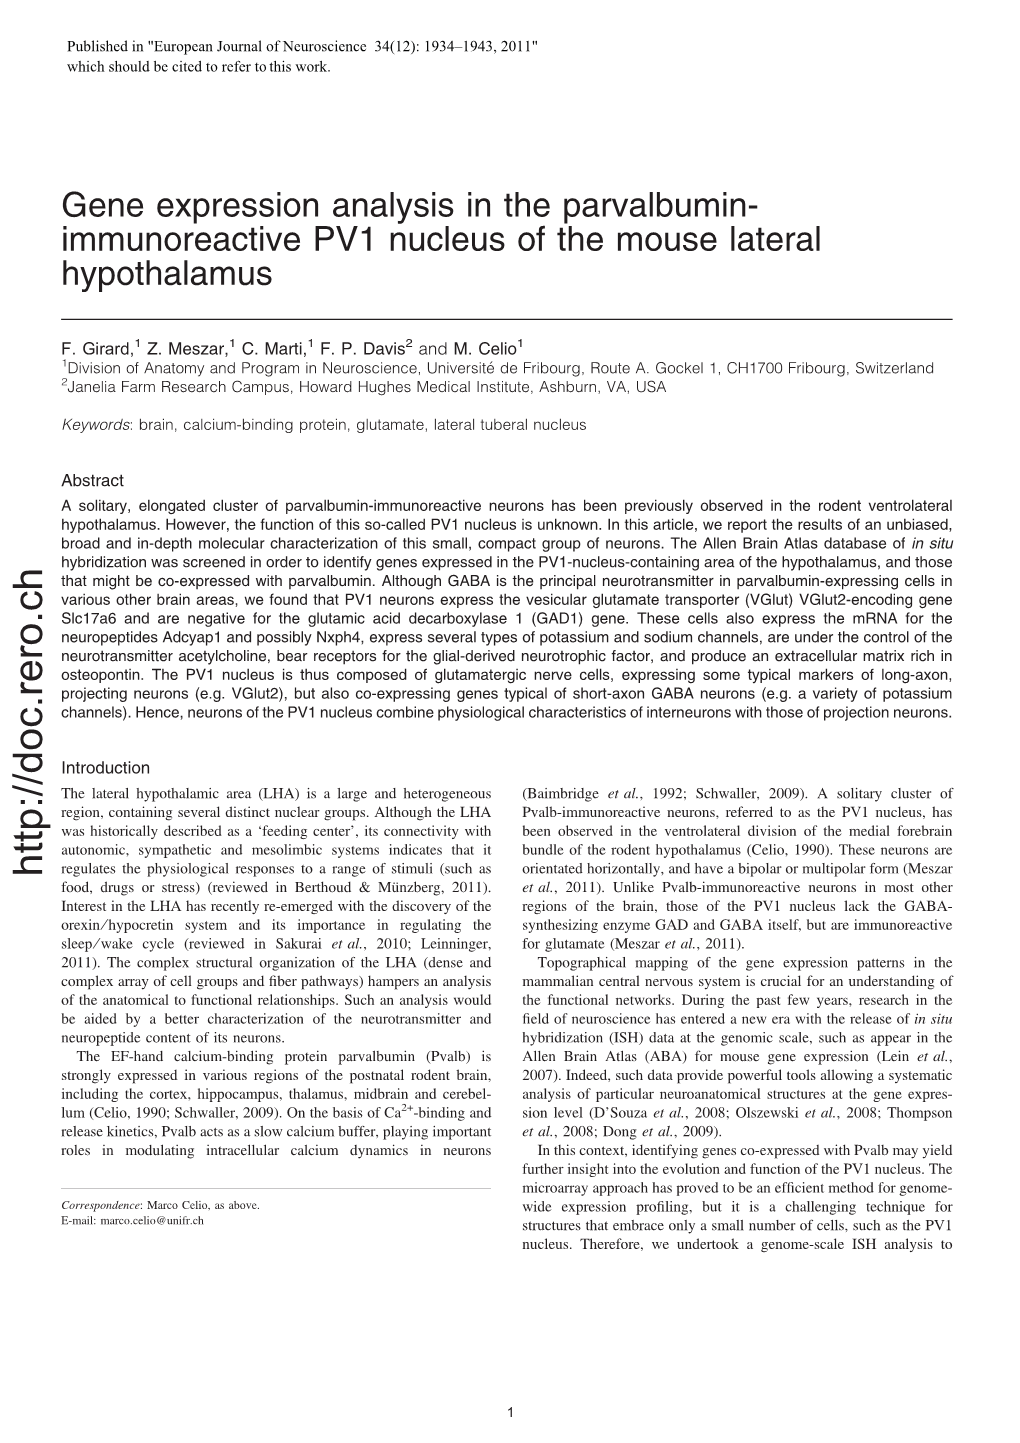 Gene Expression Analysis in the Parvalbuminimmunoreactive PV1 Nucleus of the Mouse Lateral Hypothalamus